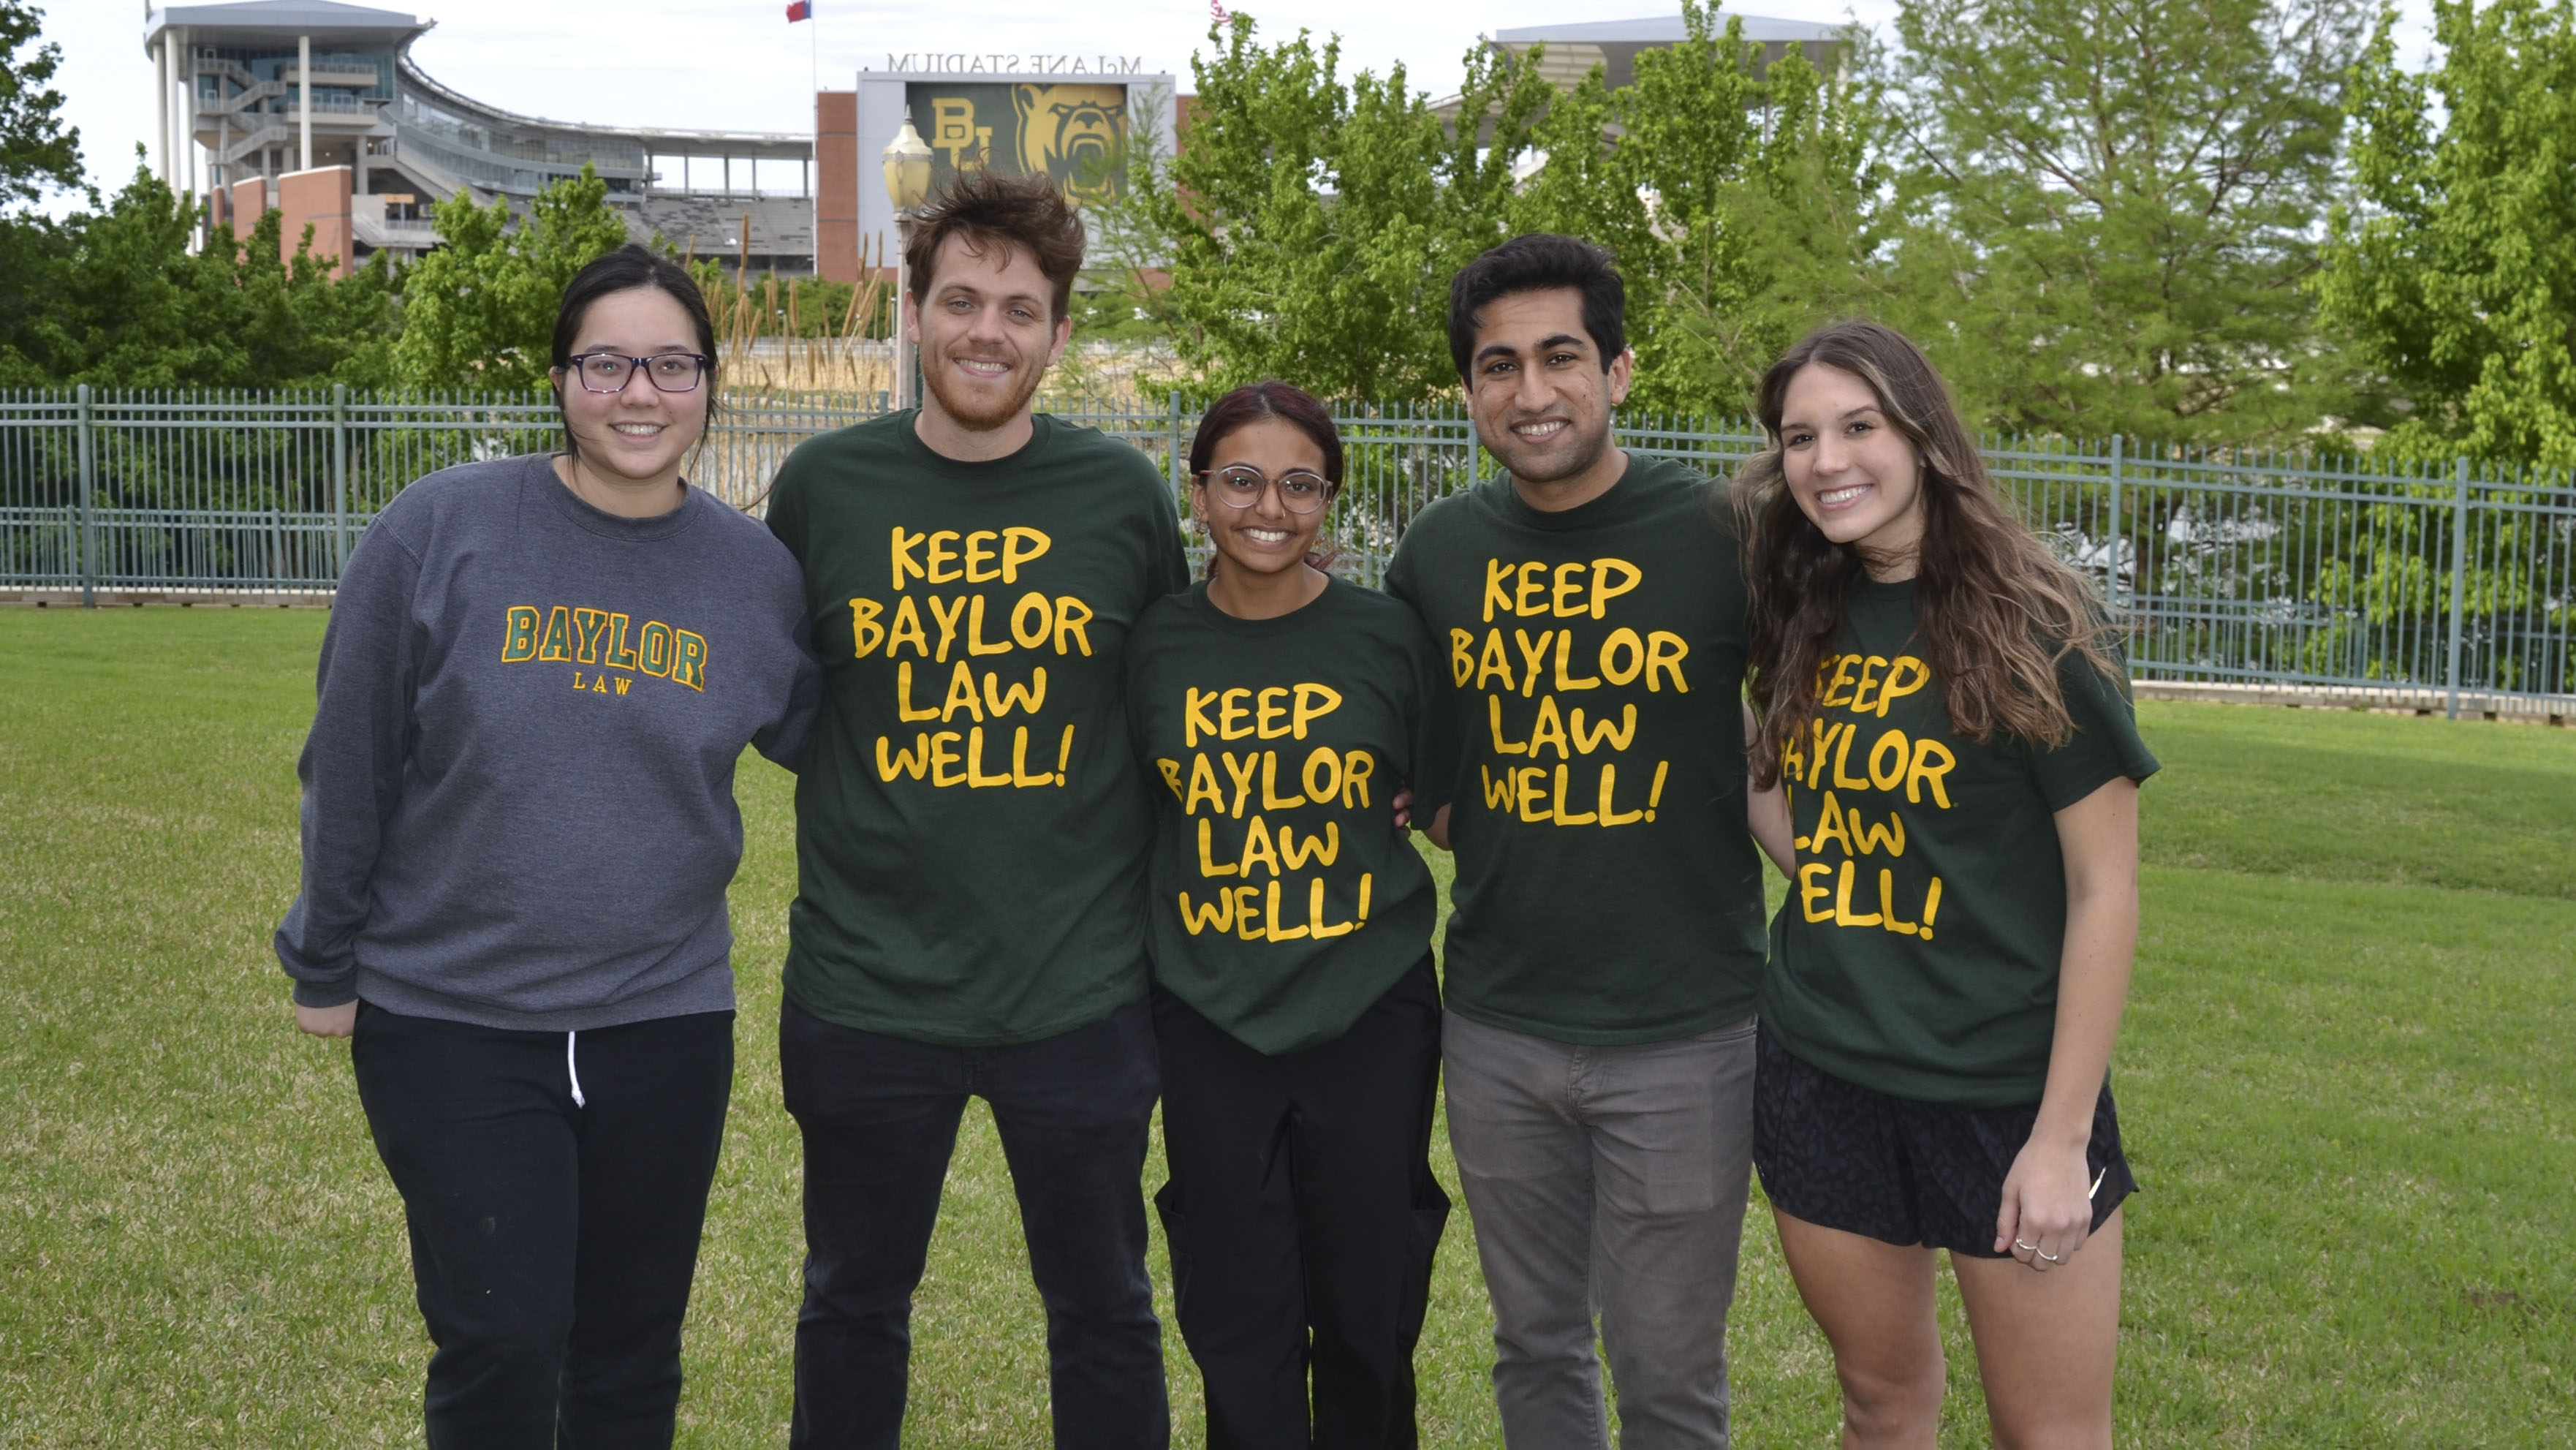 Students from the Student Wellness Organization post on the back lawn of Baylor Law, all are wearing 'Keep Baylor Law Well' T-shirts